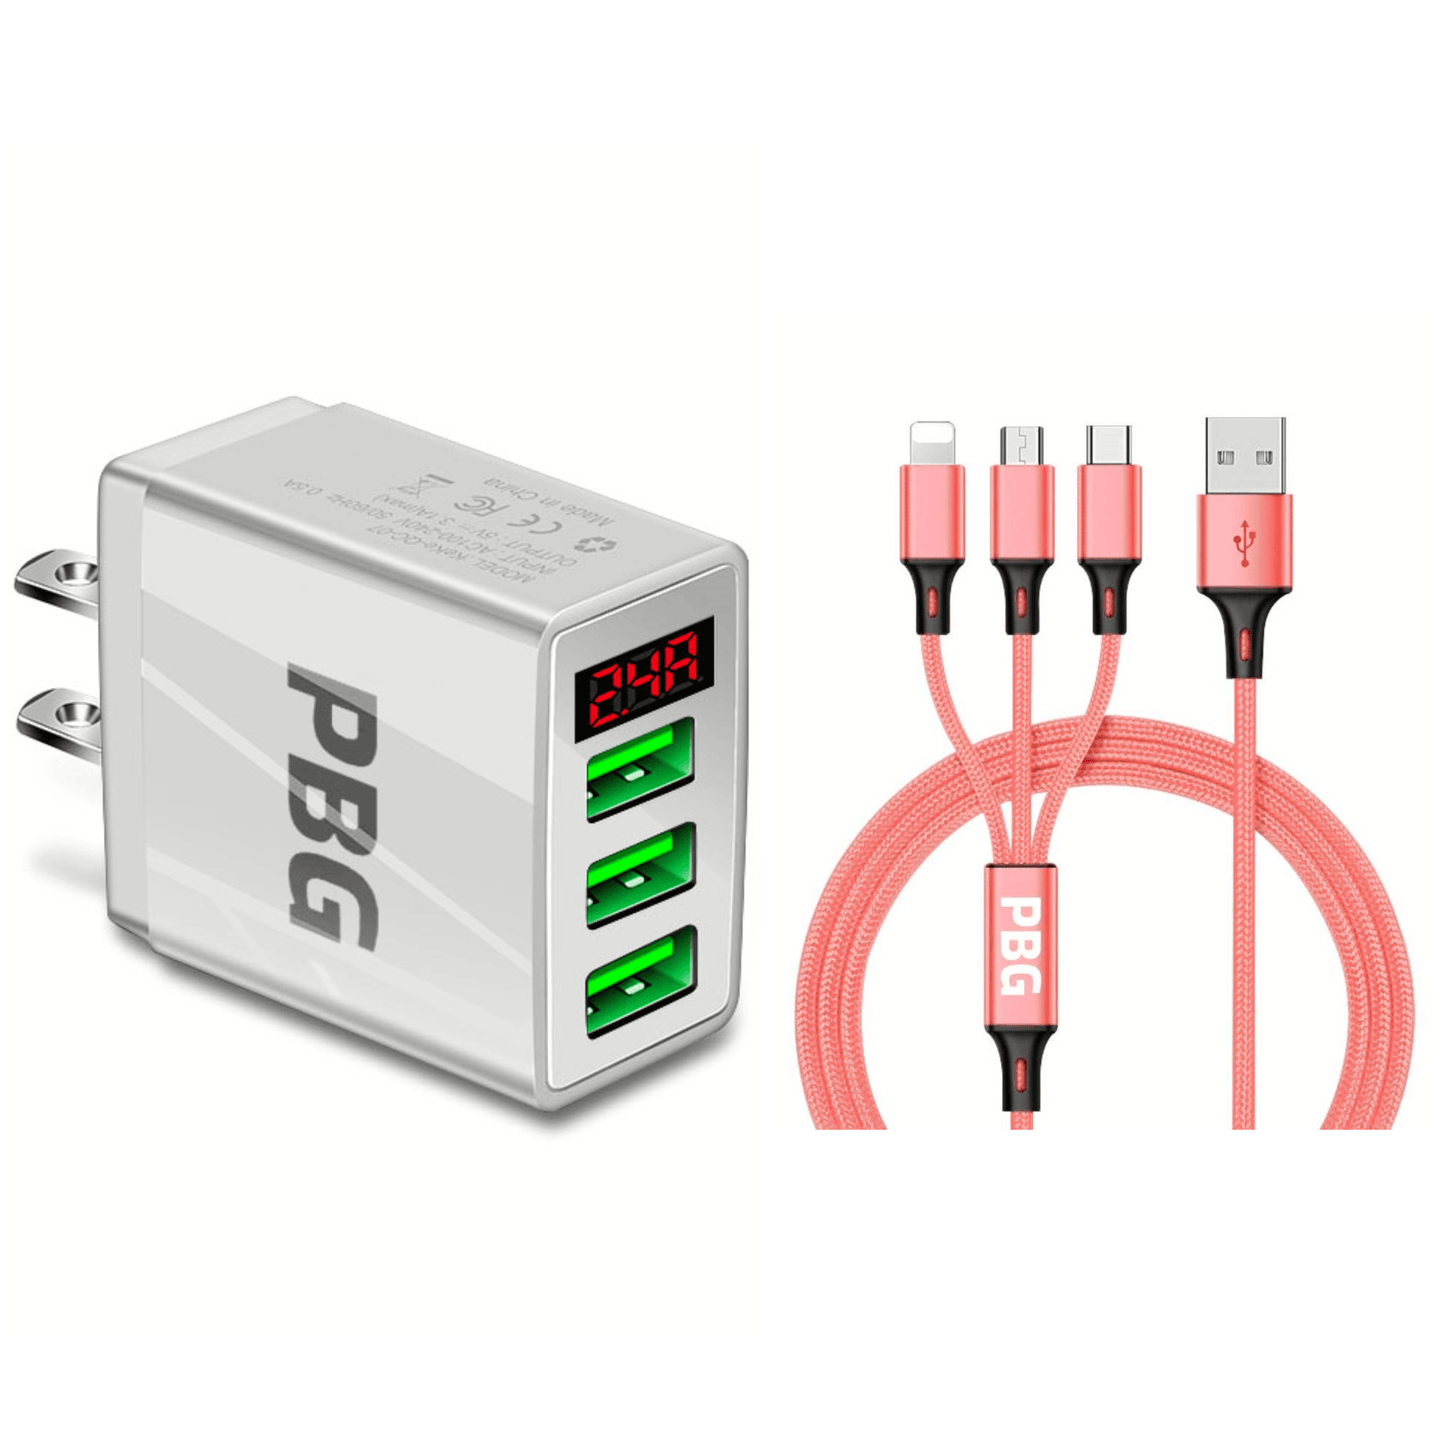 PBG 3 port LED Display Wall Charger and 3 in 1 Cable Bundle Pink - PremiumBrandGoods